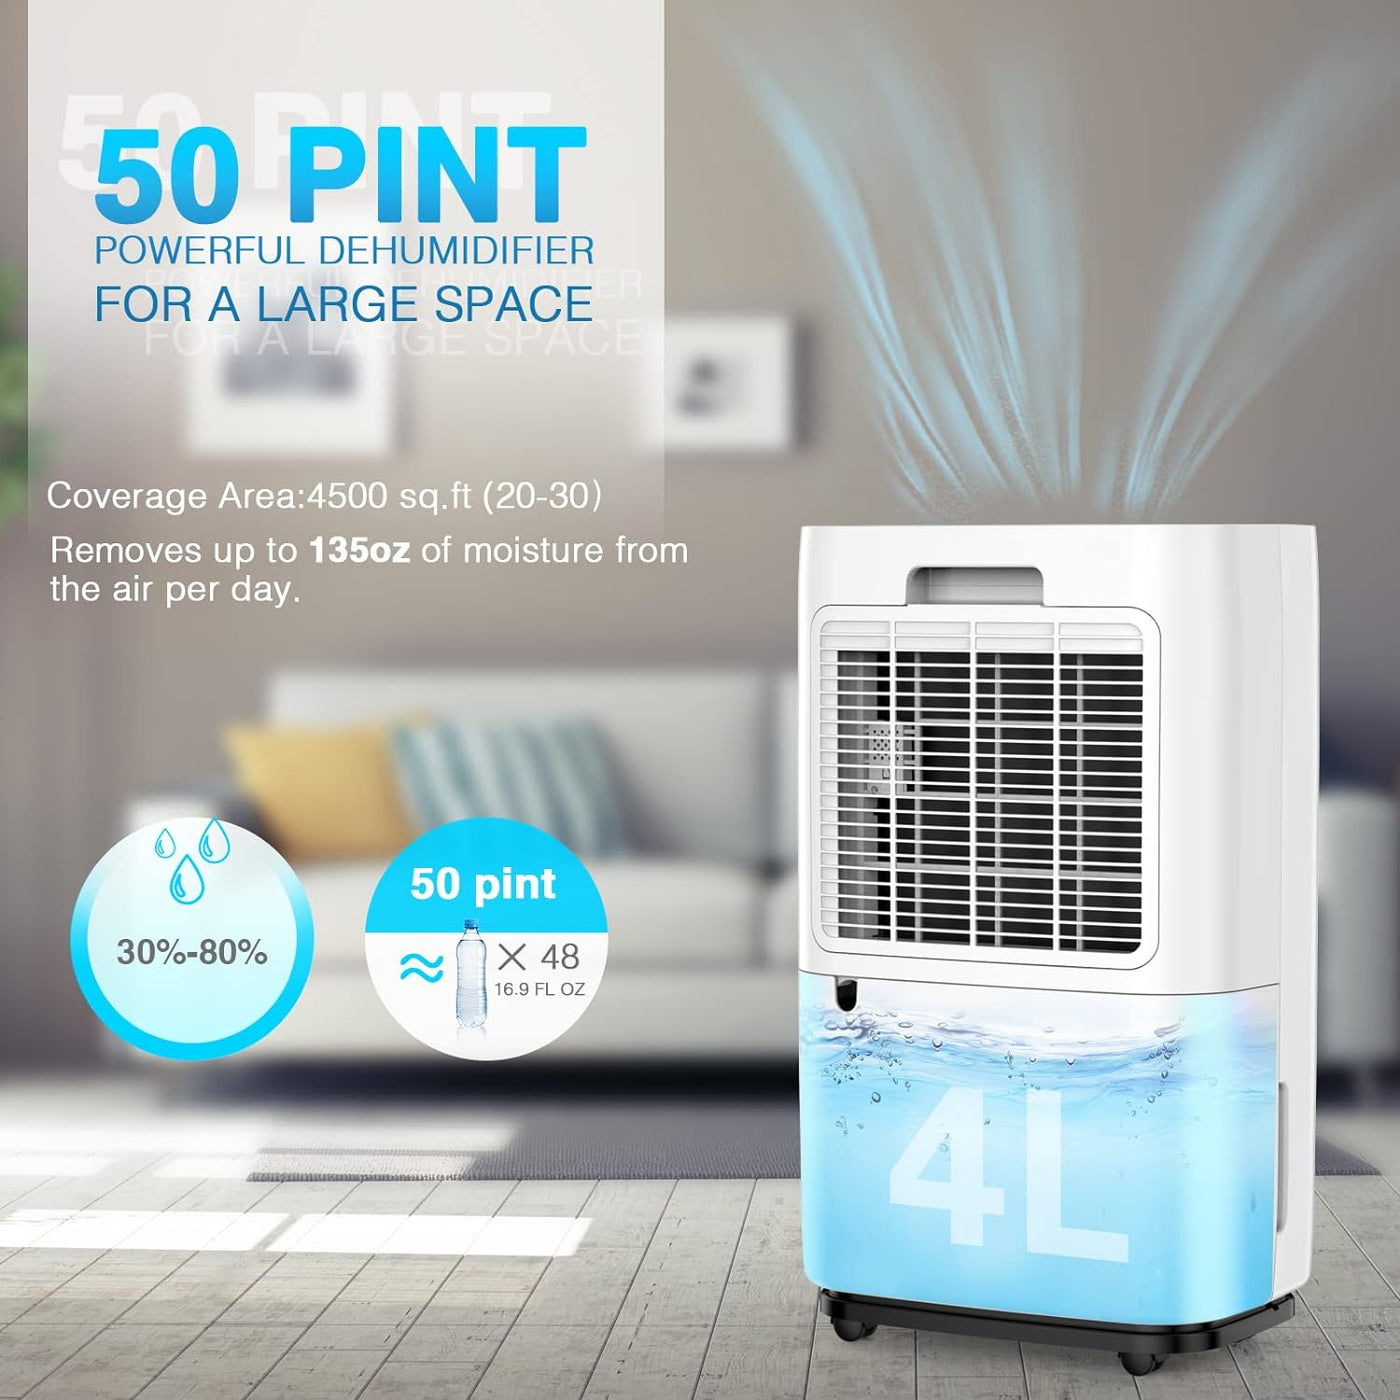 Dehumidifiers for Large Room or Basements, 50 Pint for 4500 Sq.ft Dehumidifier - $105